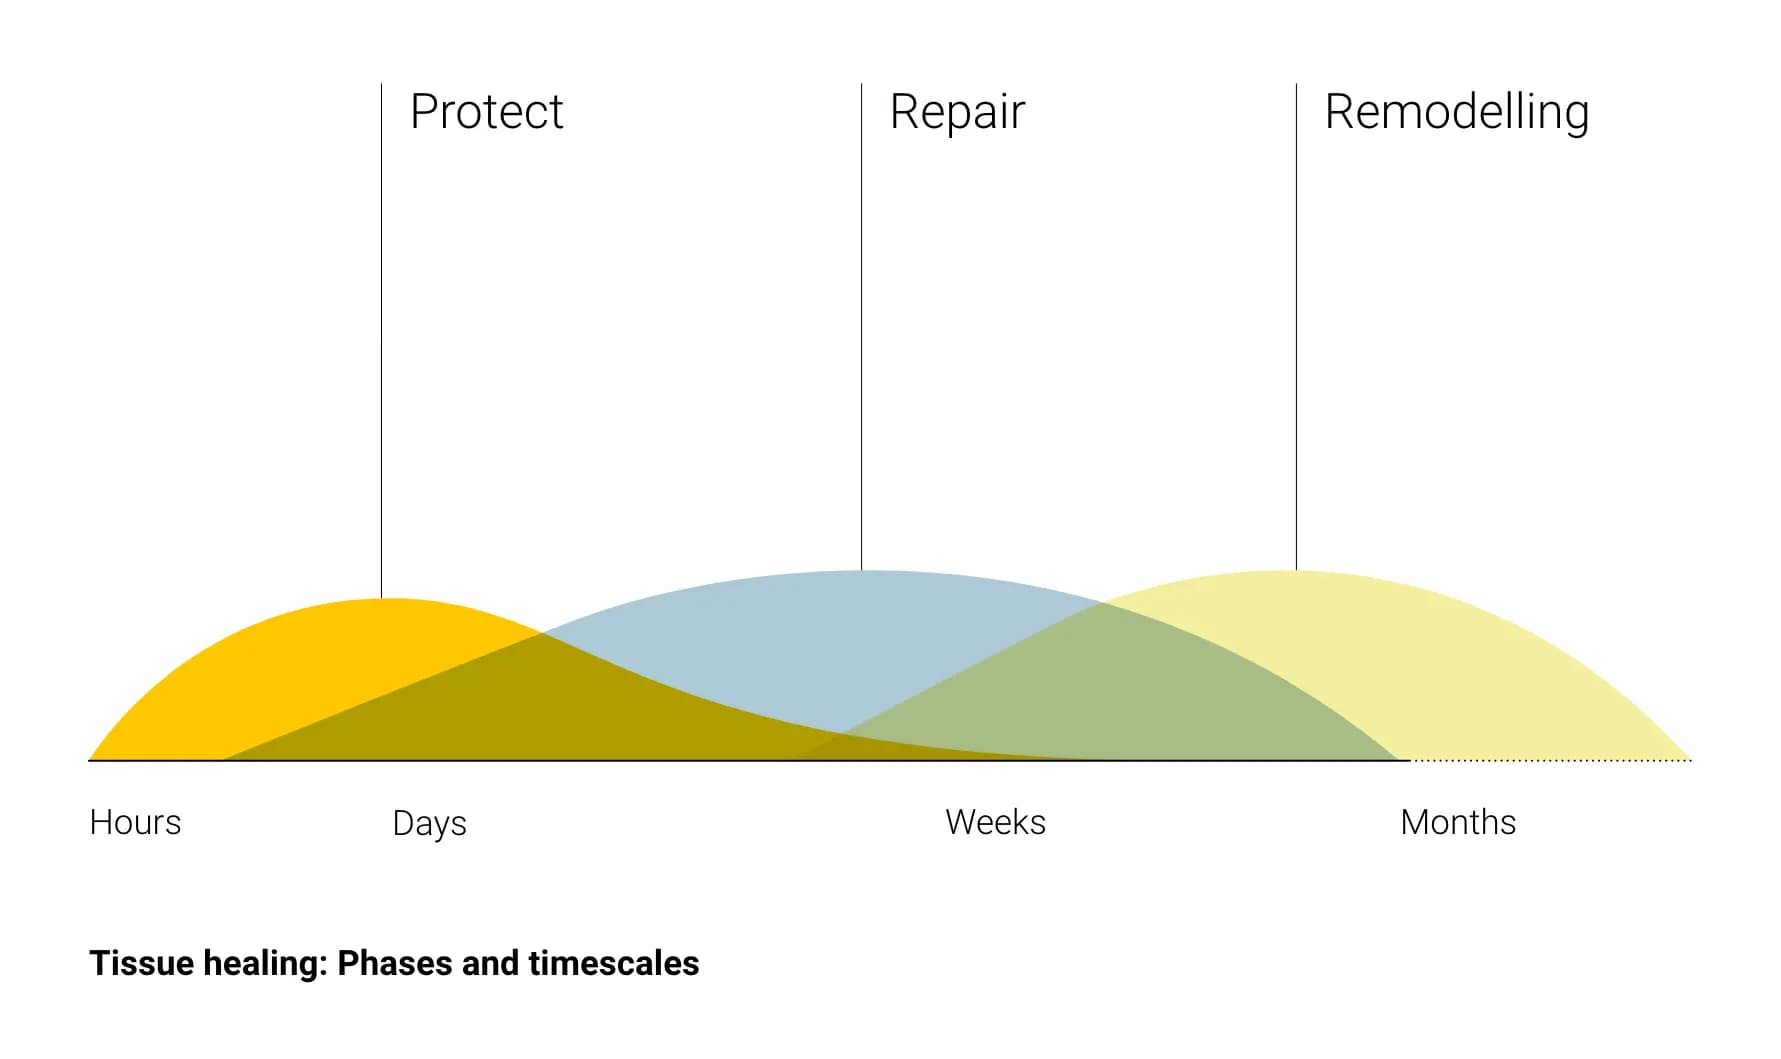 Infographic shows three phases of soft tissue injury recovery of protect, repair and remodelling